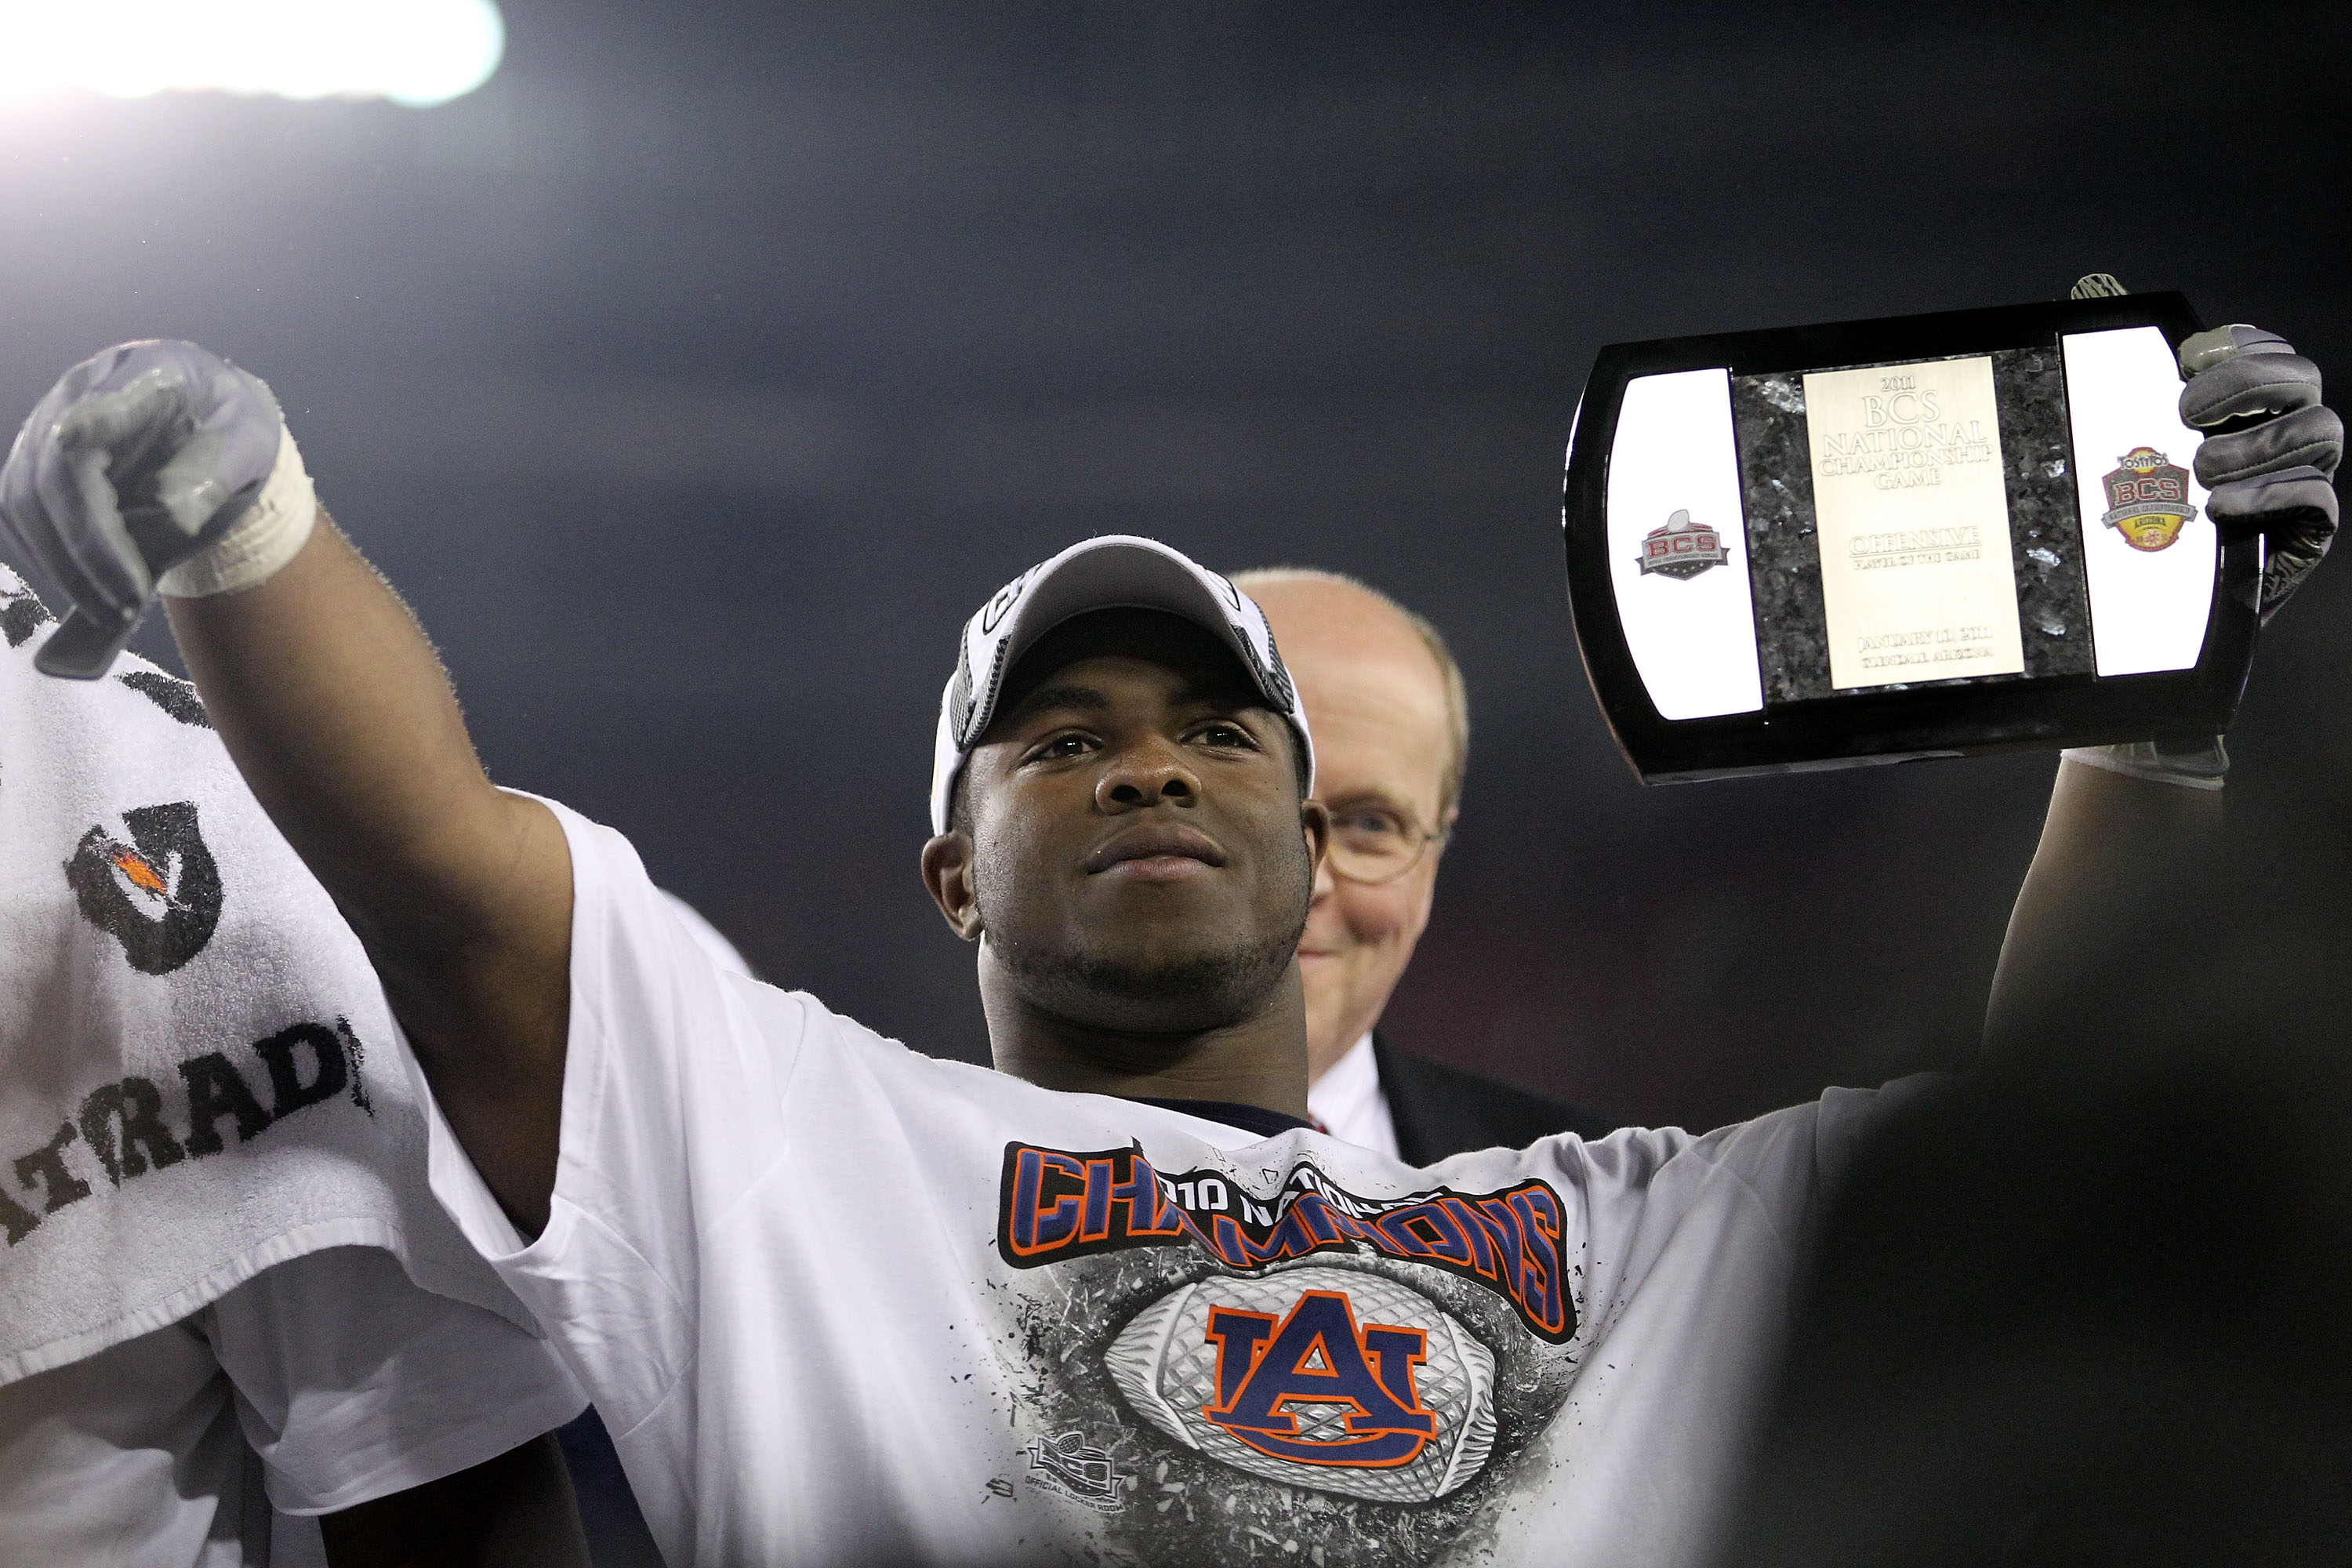 2011 Tostitos BCS National Championship: 5 Things We Learned From Auburn's  Win, News, Scores, Highlights, Stats, and Rumors